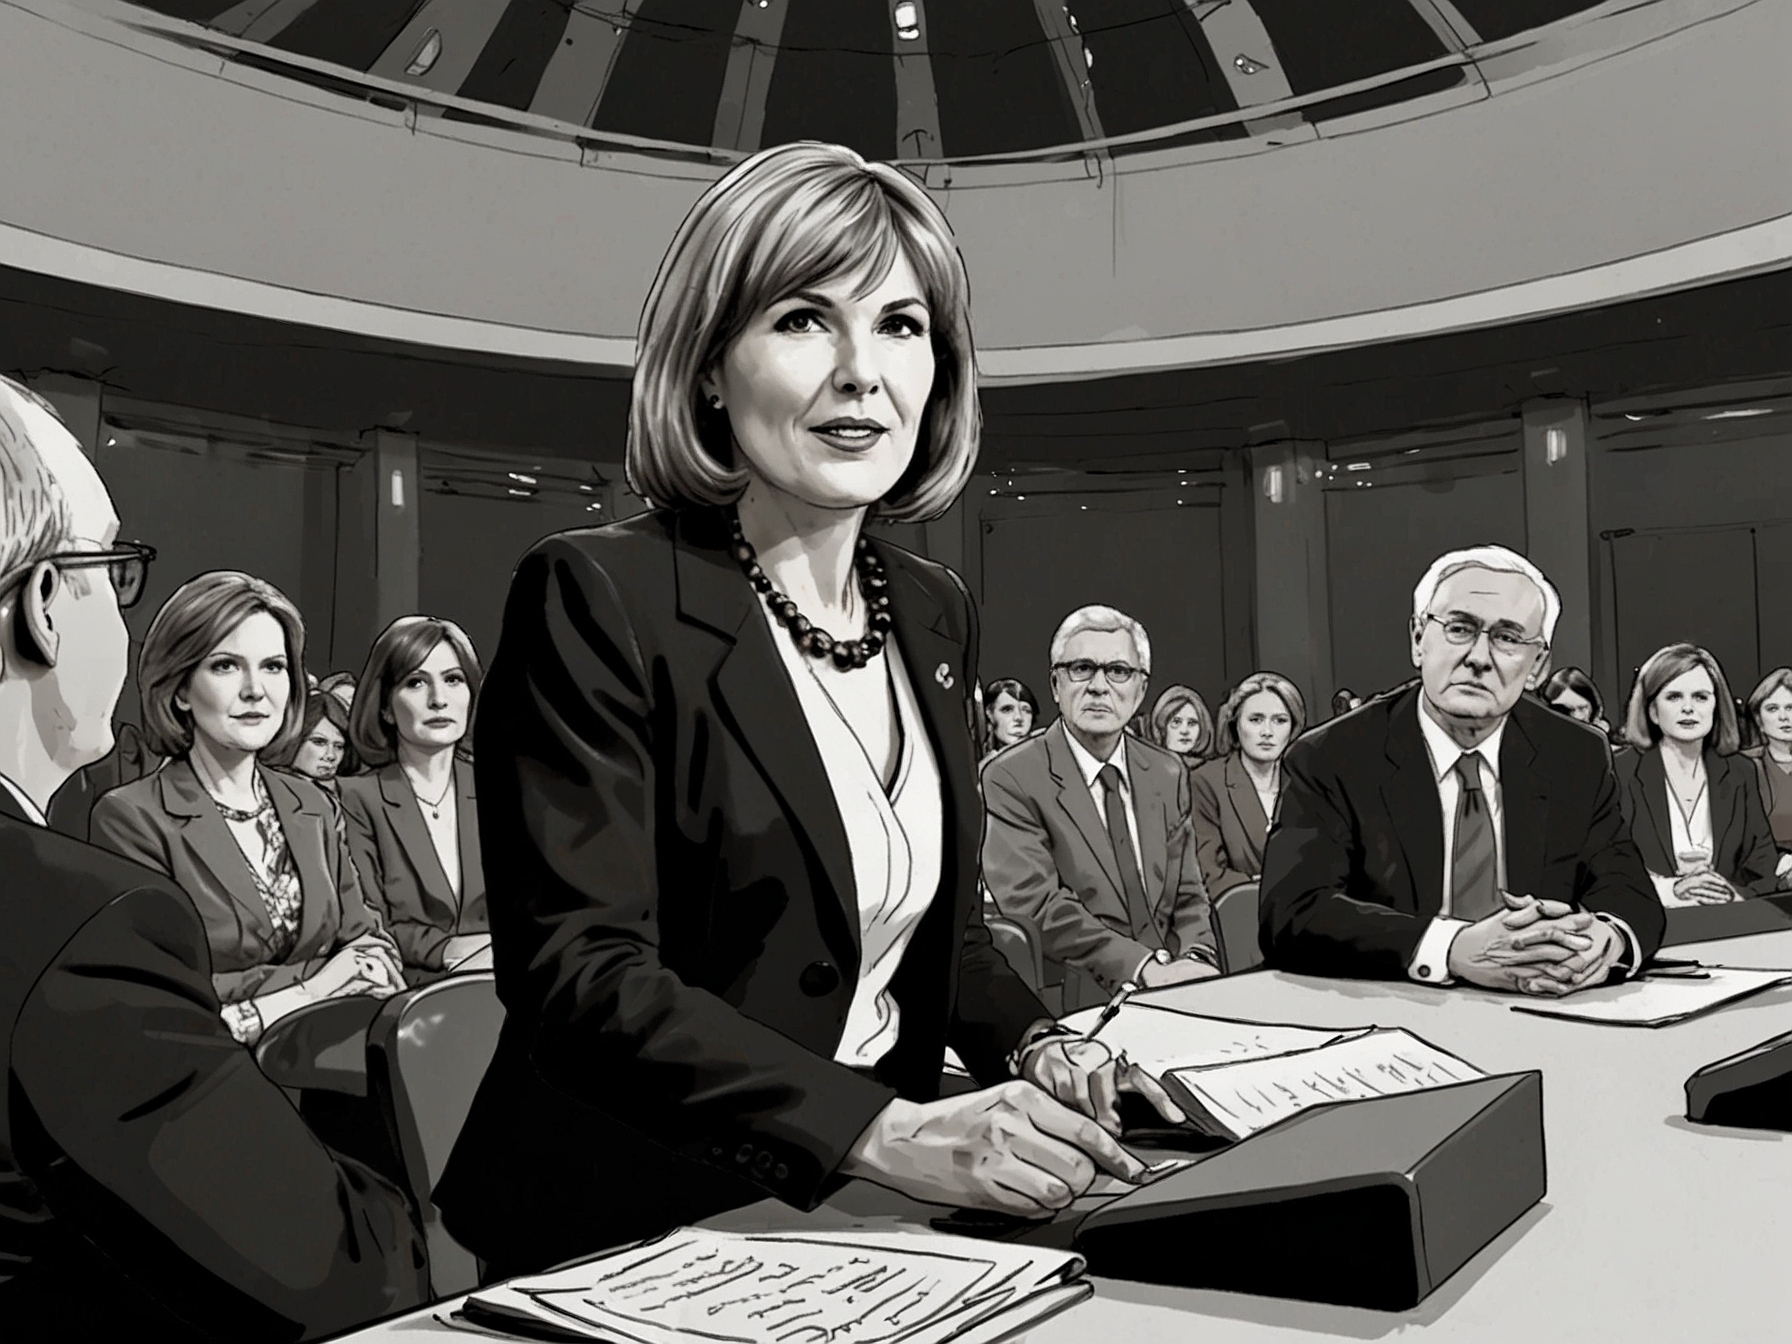 Fiona Bruce moderating a heated debate on BBC’s Question Time, ensuring fair representation and orderly discussion as political leaders face questions from the audience.